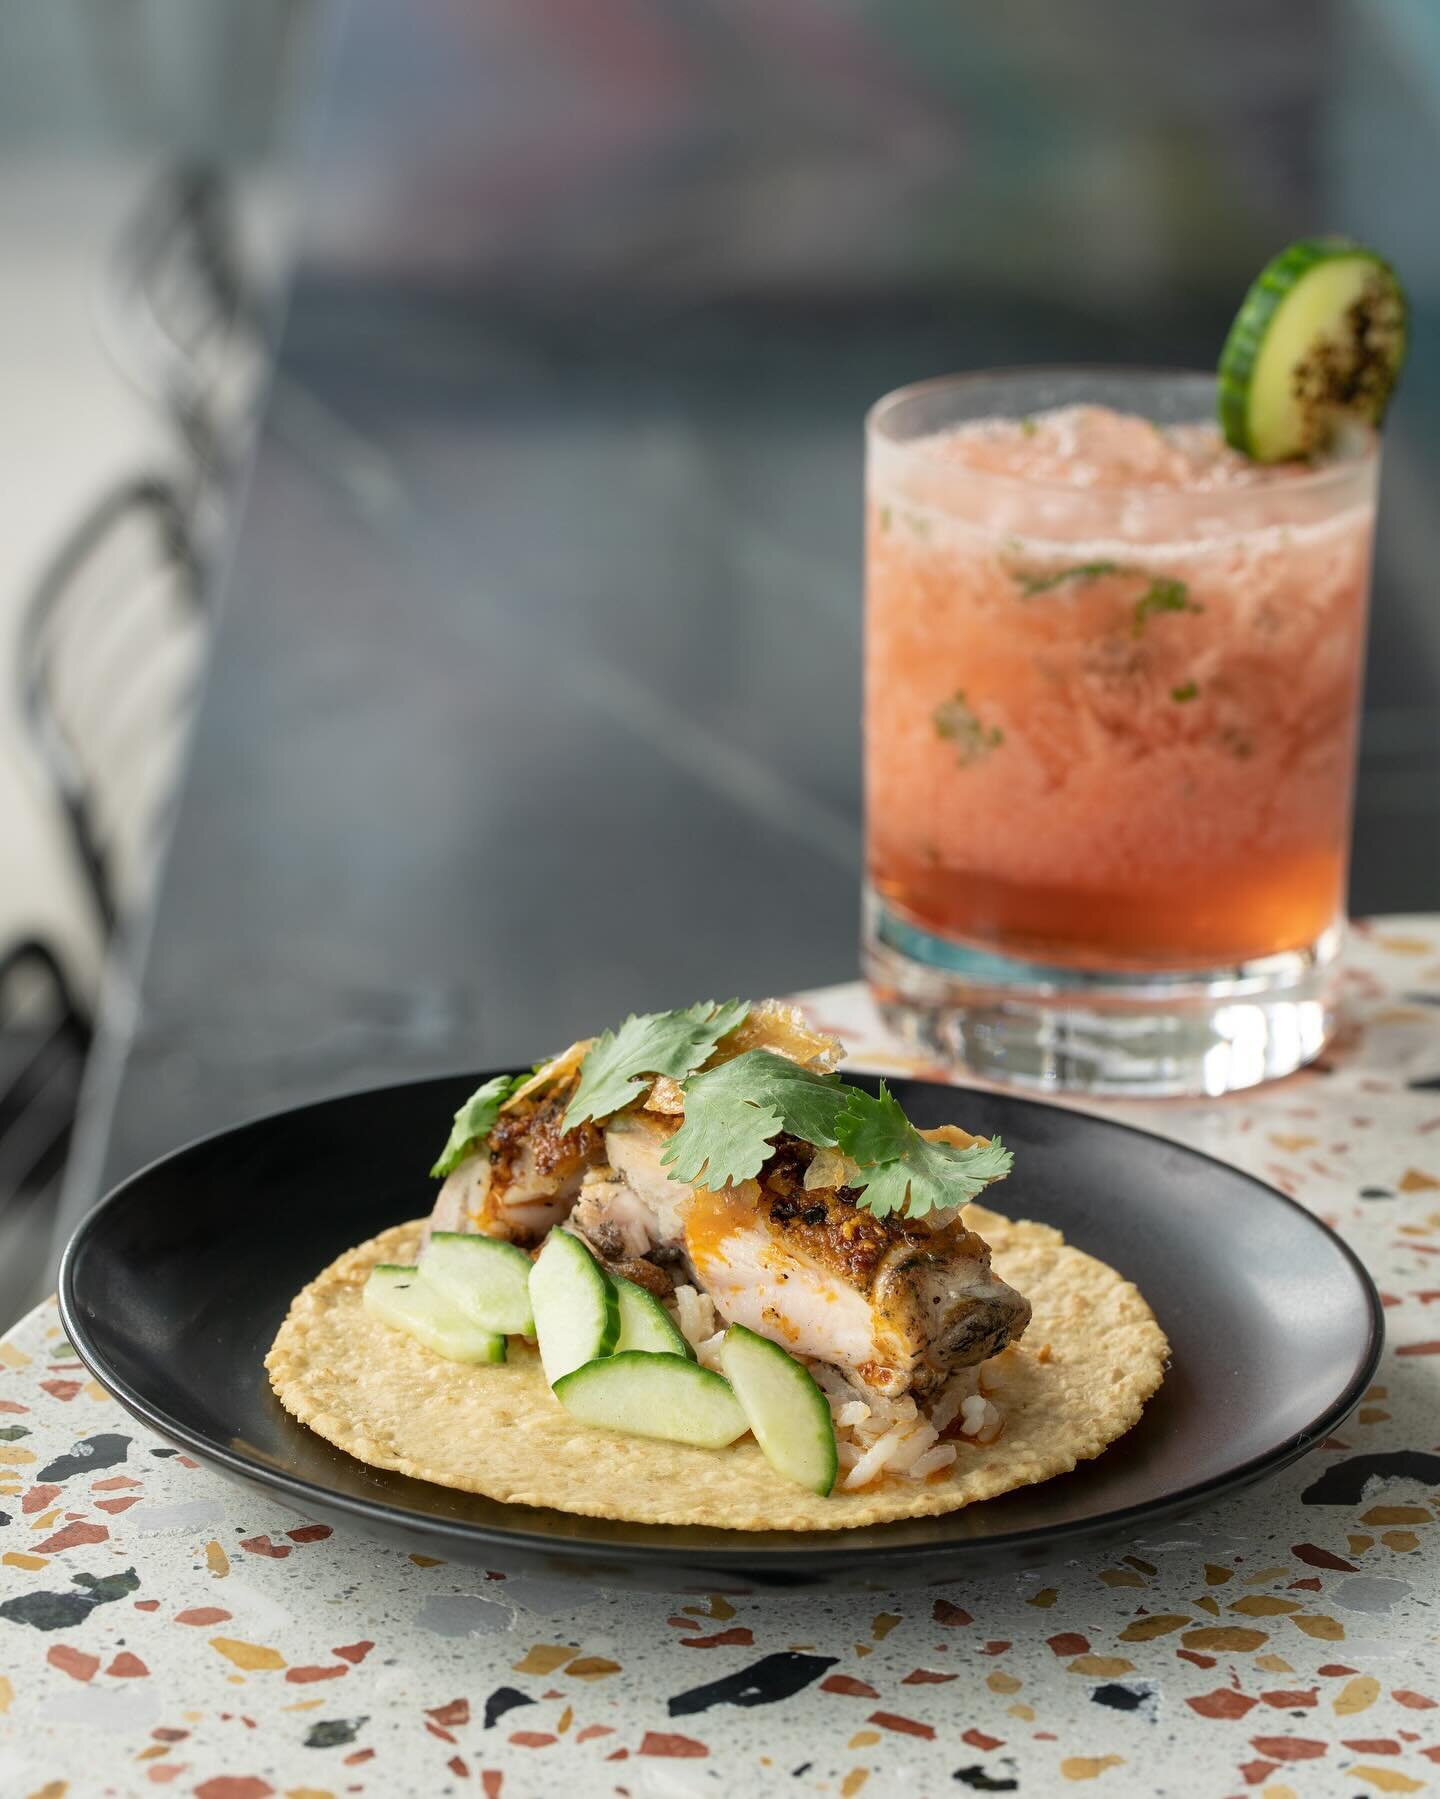 No better time than #NationalMargaritaDay to announce the newest client to join the H2 roster: @lola55tacos, San Diego&rsquo;s only MICHELIN Bib Gourmand taqueria 🌮🍹Since opening its East Village flagship in 2018, Lola 55 has been a veritable stapl